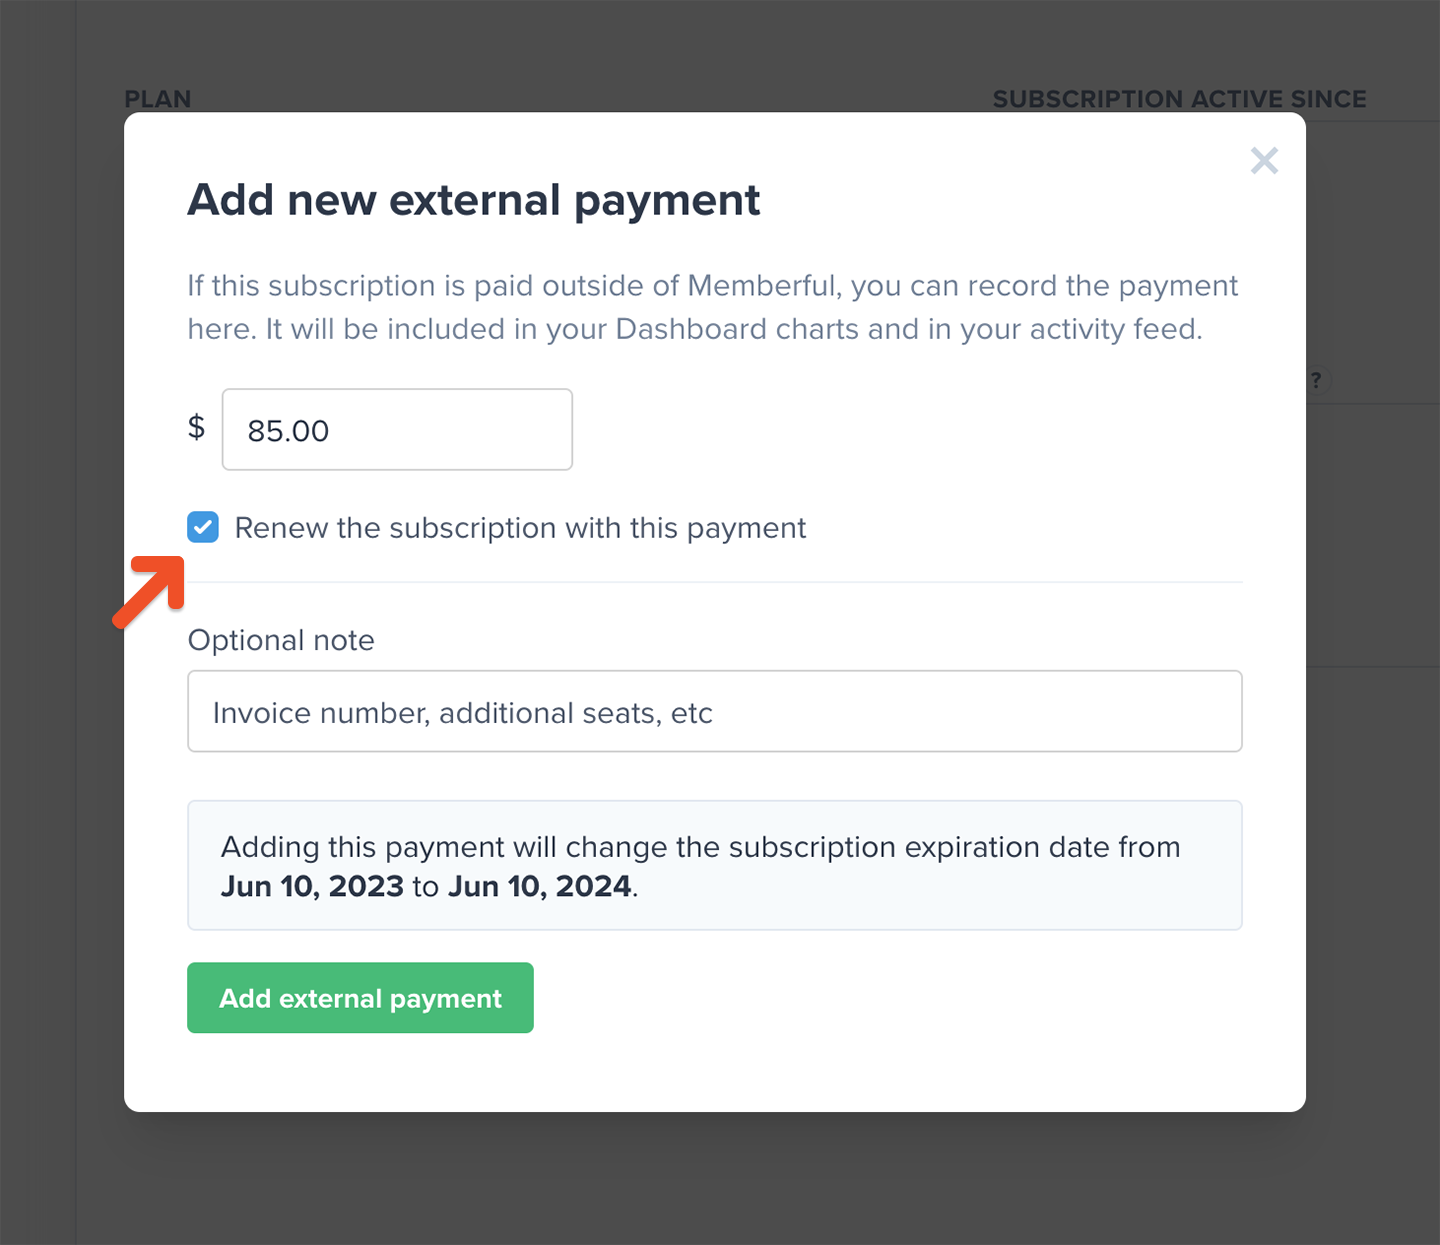 Renew with payment